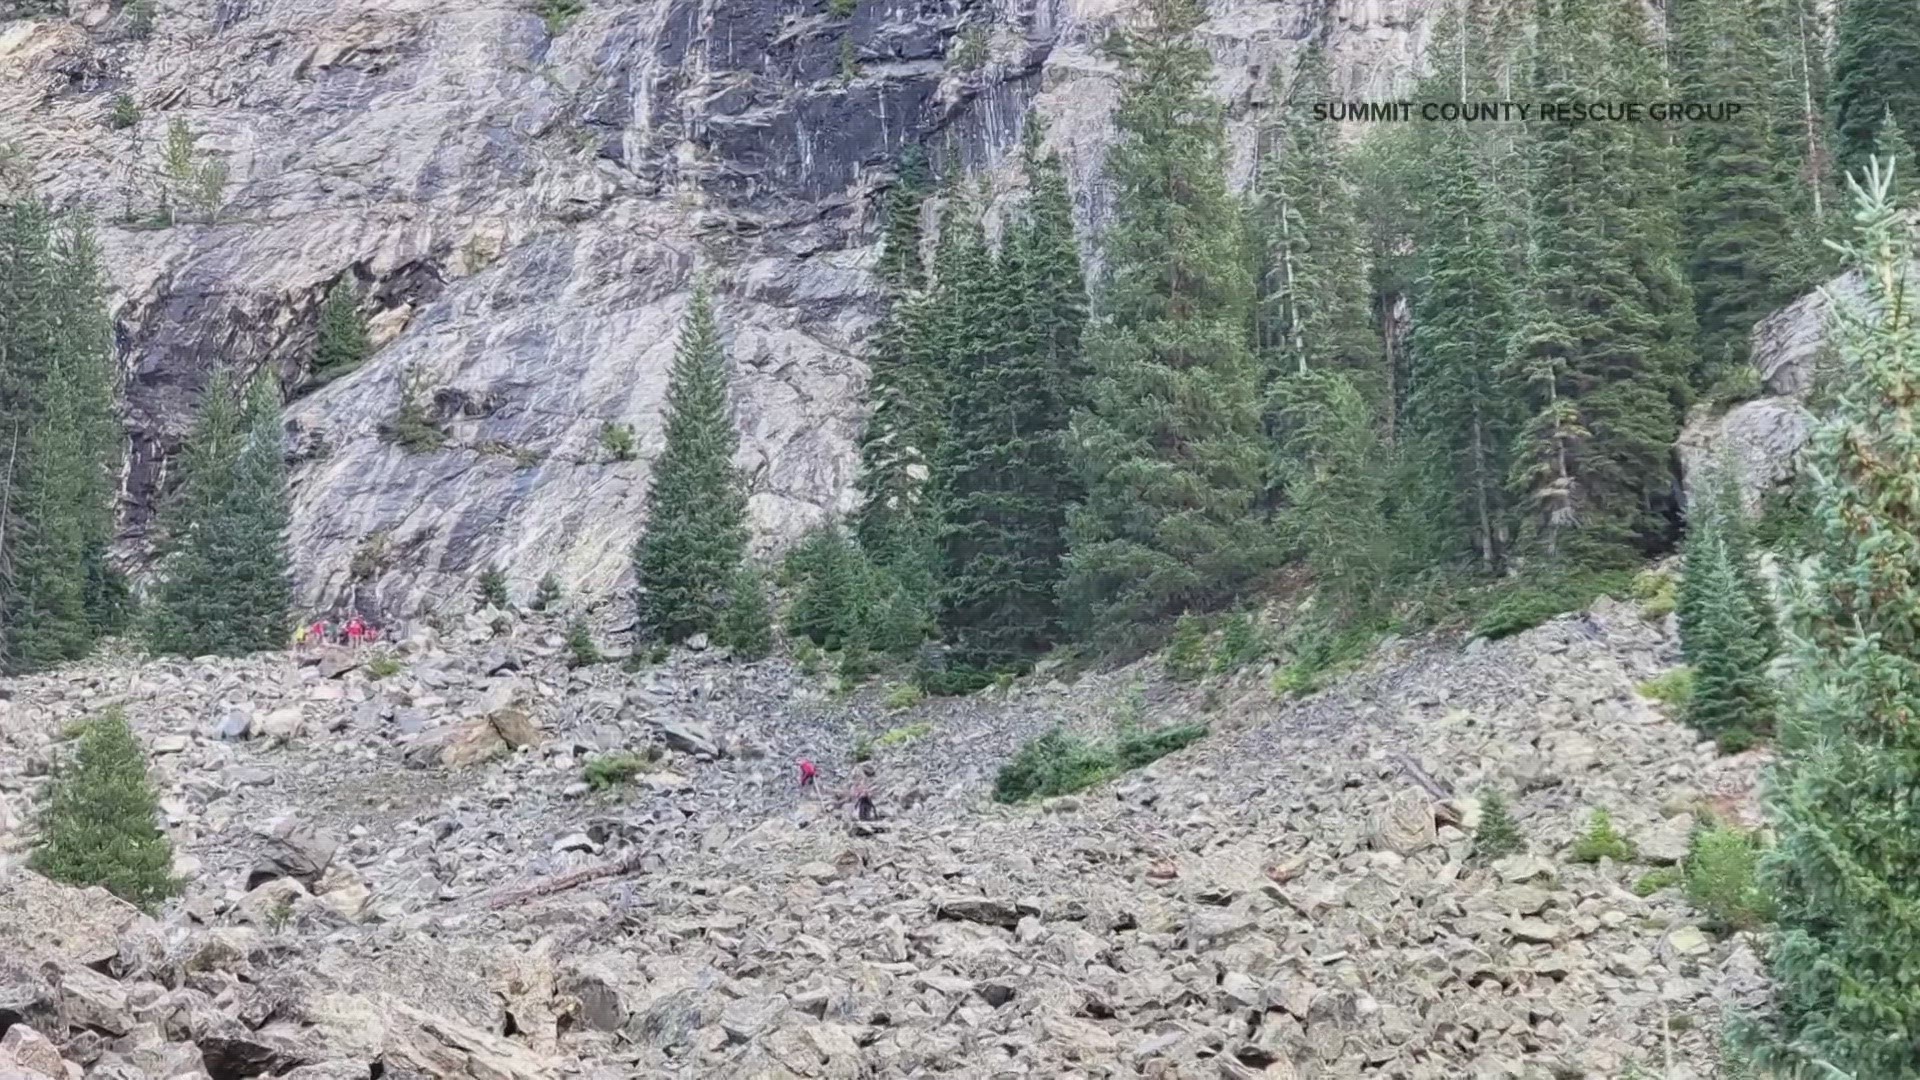 Rescuers said a friend reported the climber missing Saturday night. His body was found Sunday morning.